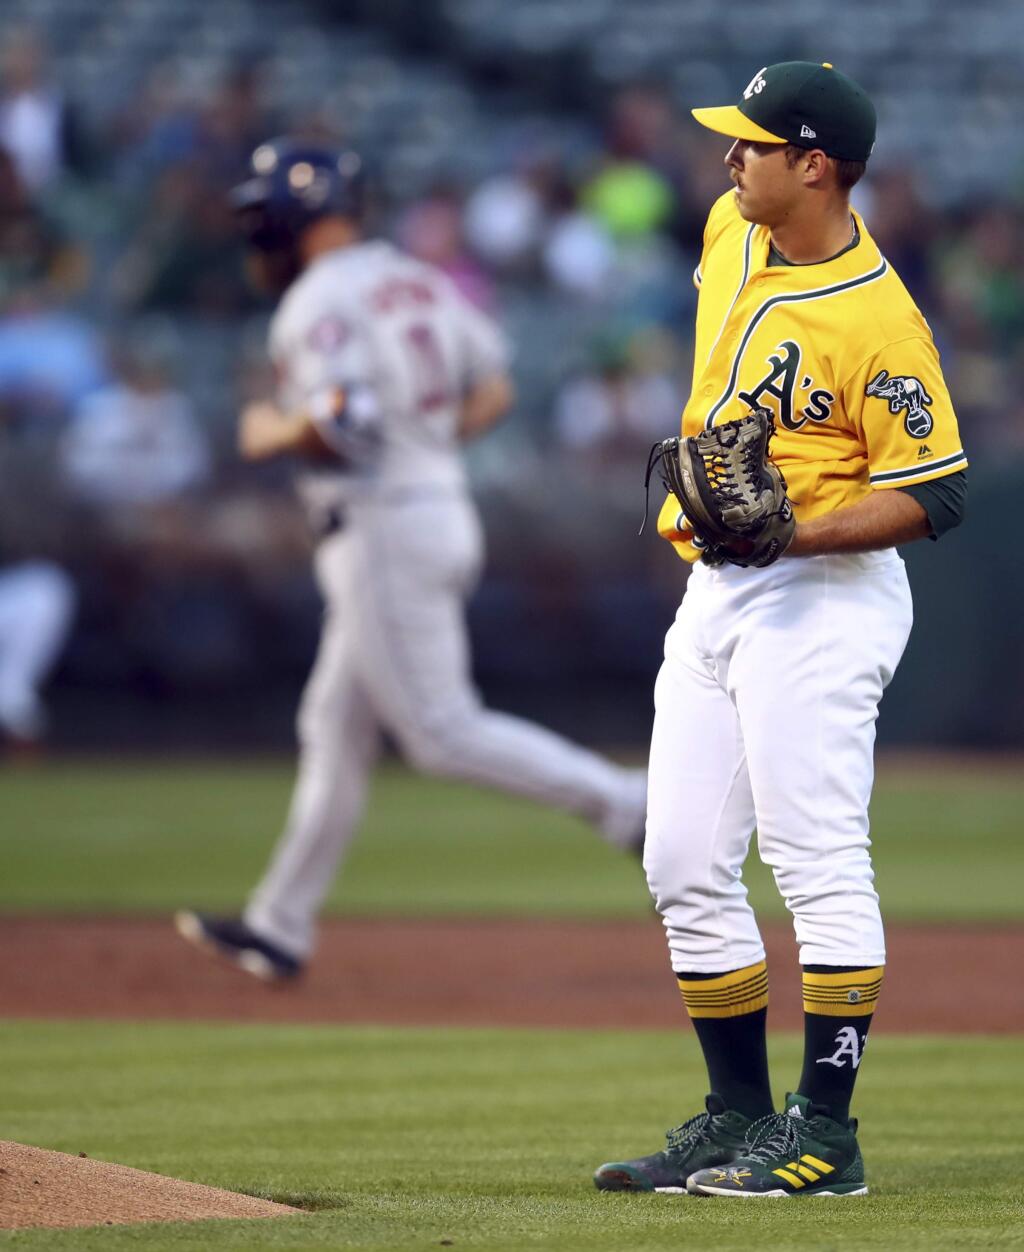 Oakland Athletics pitcher Daniel Mengden, right, waits for the Houston Astros' Evan Gattis to run the bases after hitting a three-run home run during the second inning Tuesday, June 12, 2018, in Oakland. (AP Photo/Ben Margot)